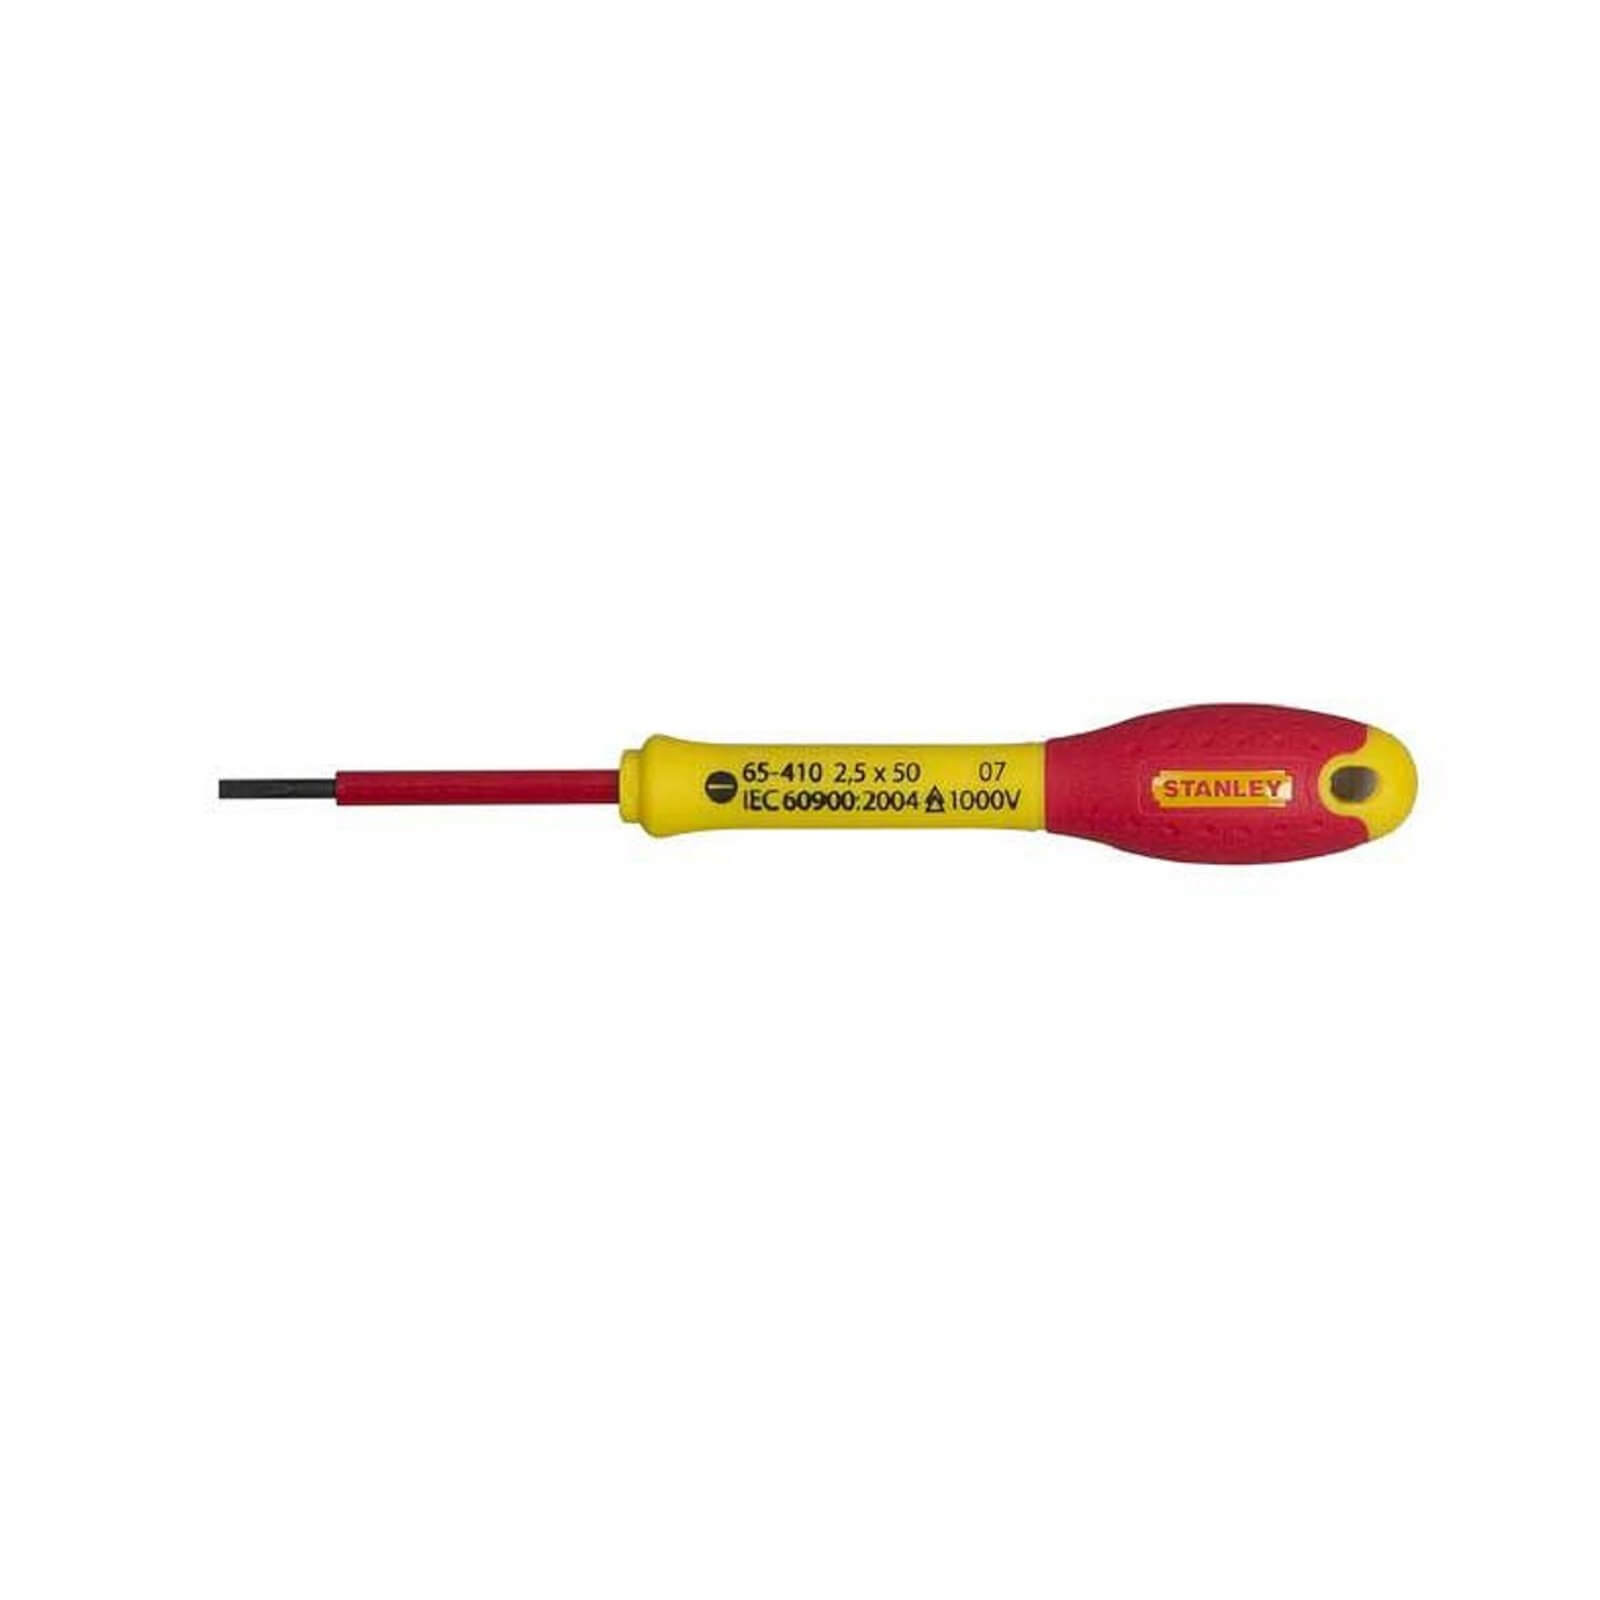 Photo of Stanley Fatmax Slotted Insulated Screwdriver - 2.5x50mm